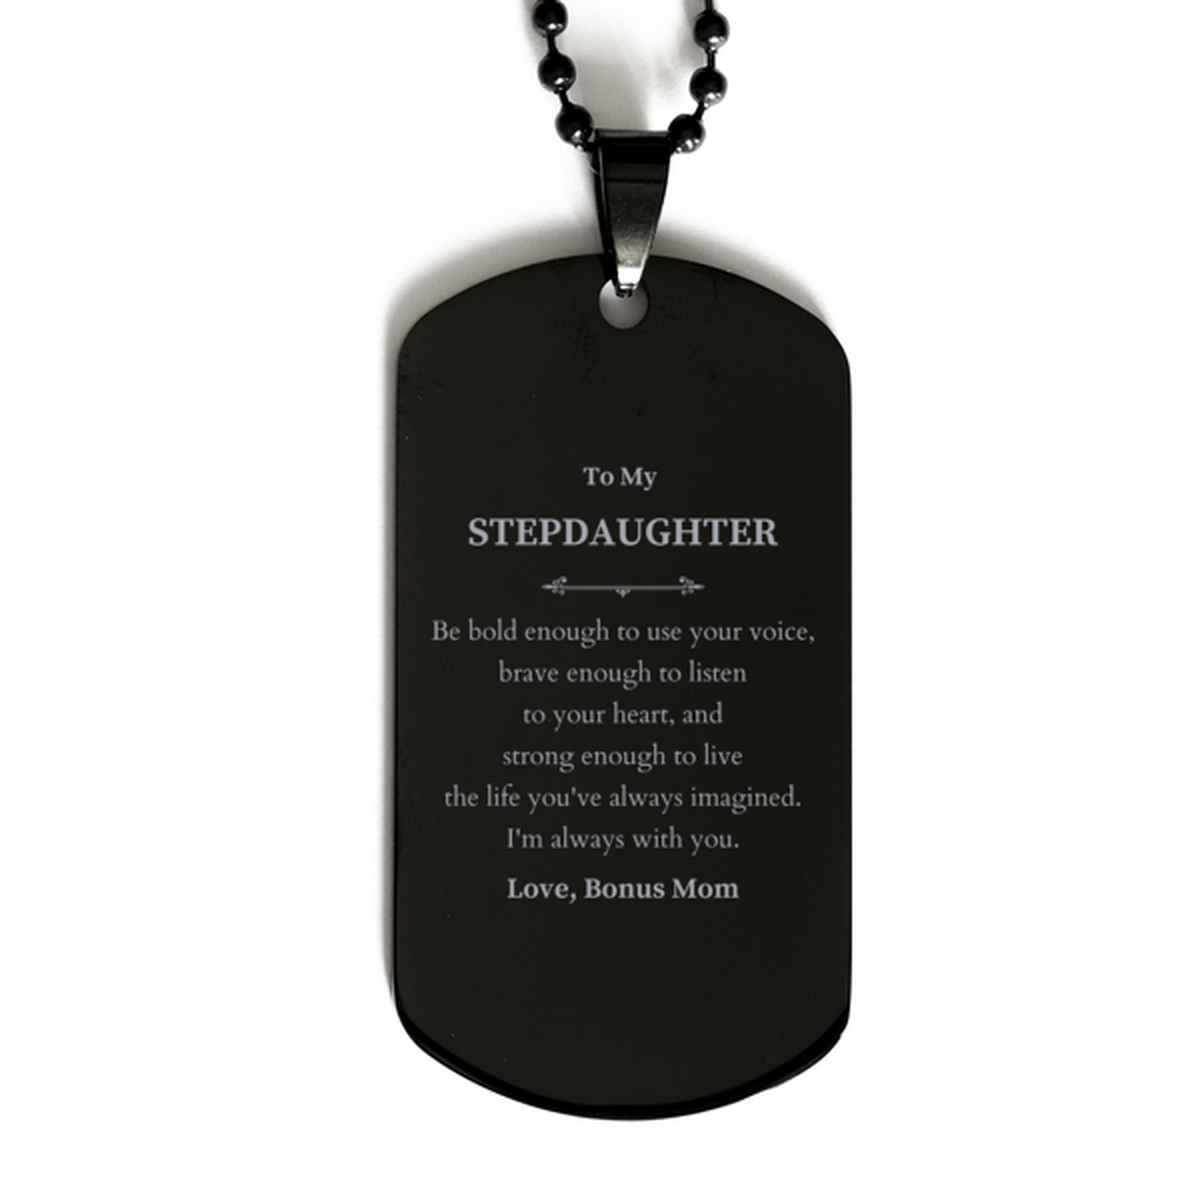 Keepsake Stepdaughter Black Dog Tag Gift Idea Graduation Christmas Birthday Stepdaughter from Bonus Mom, Stepdaughter Be bold enough to use your voice, brave enough to listen to your heart. Love, Bonus Mom